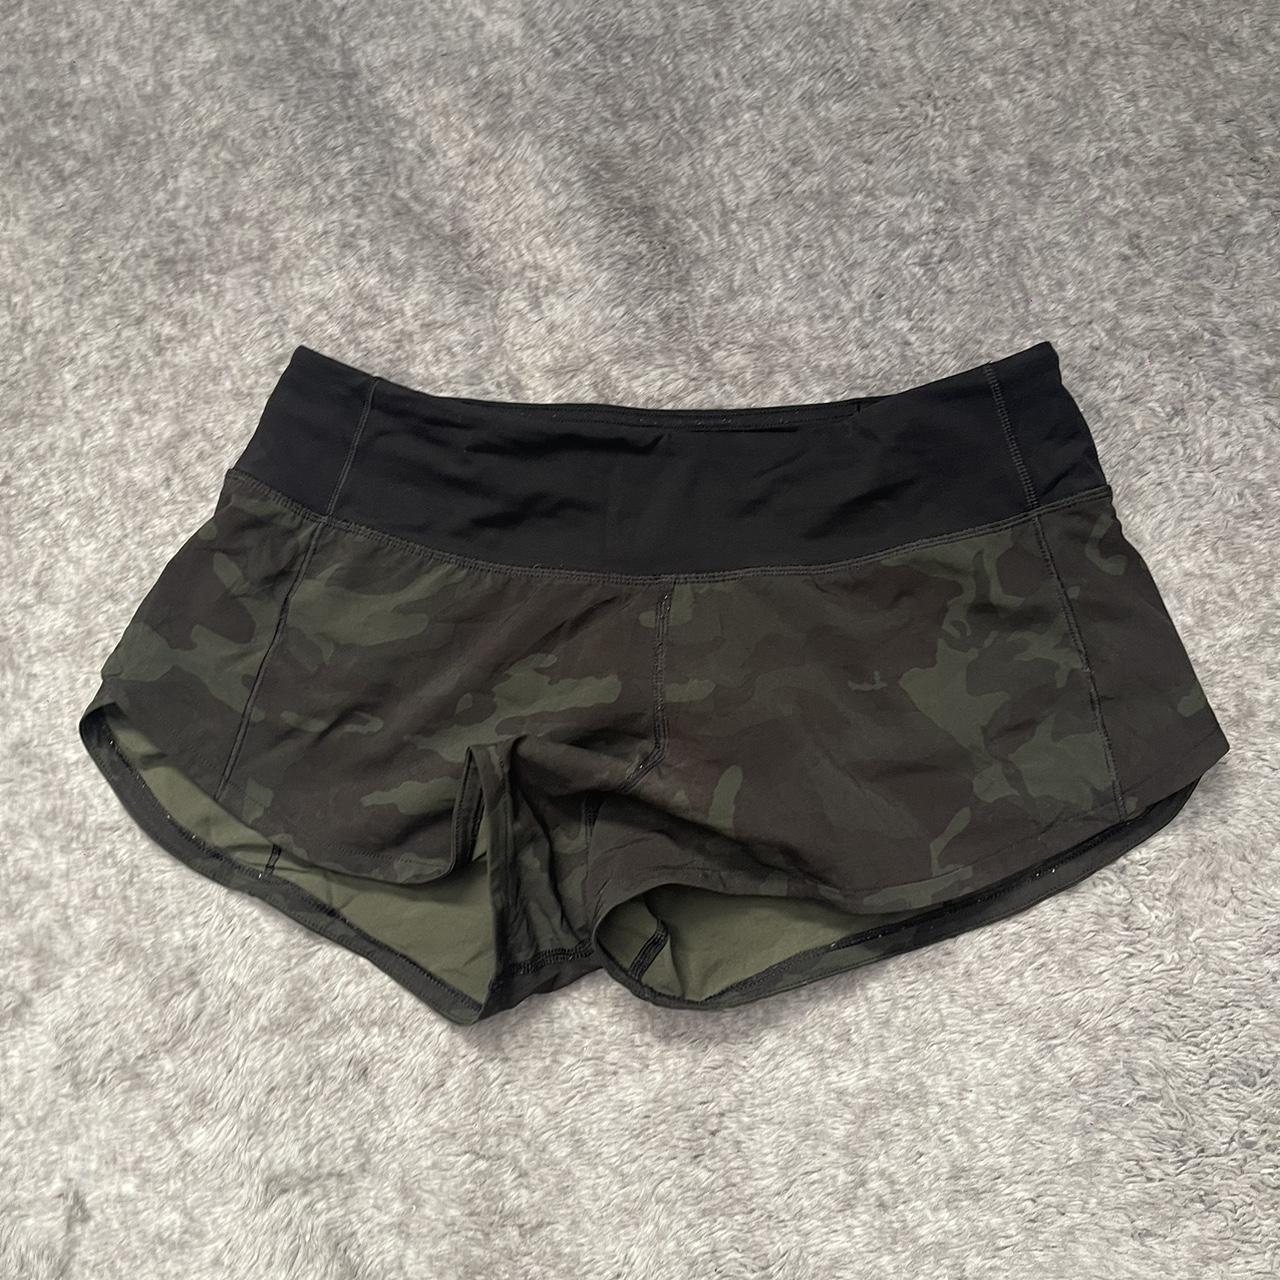 Lululemon Speed Up Short Incognito Camo Multi Gator Green Low Rise 2.5  Size 4